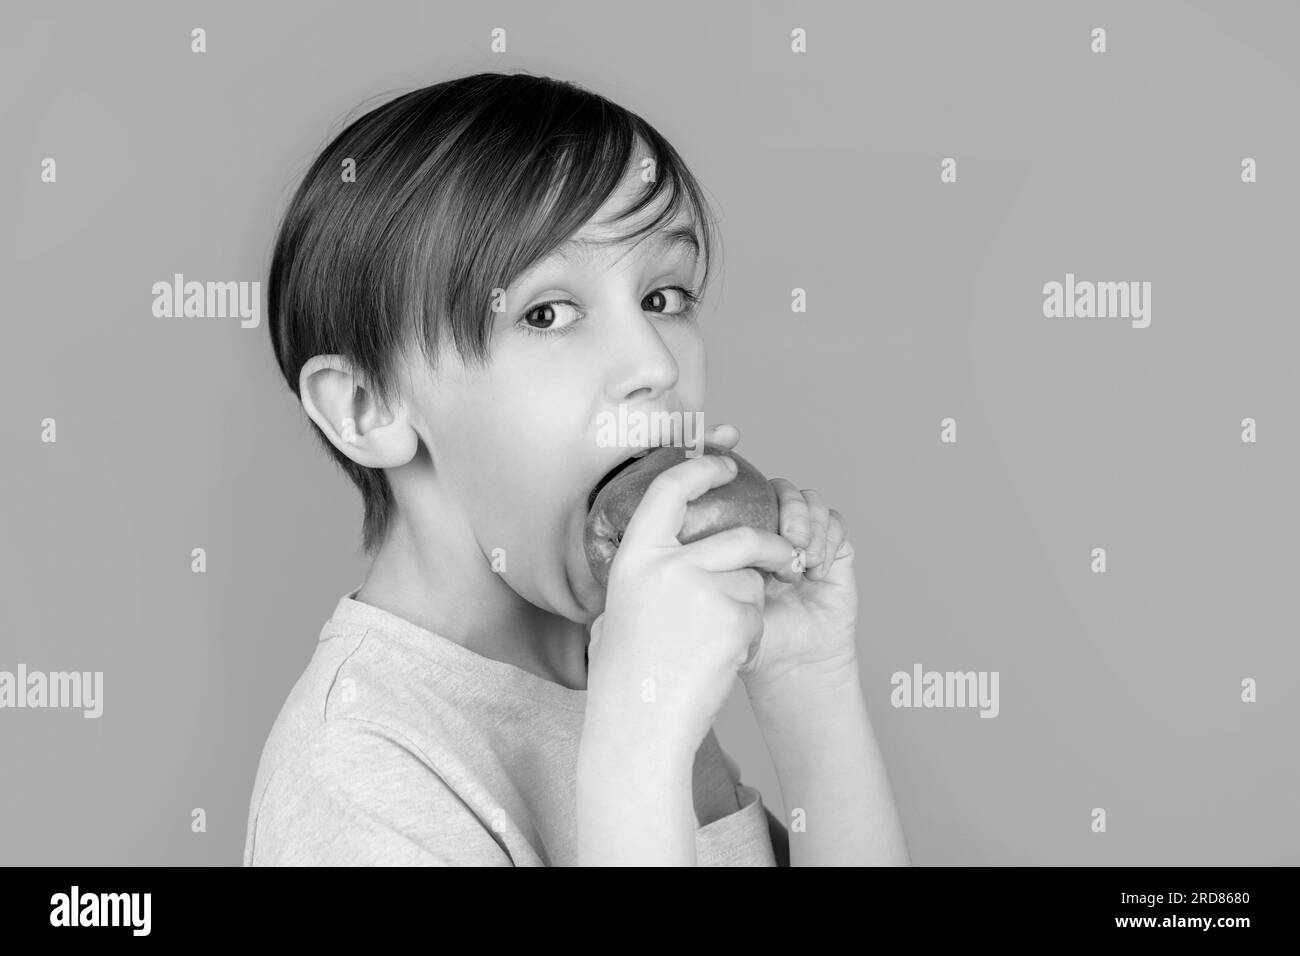 Boy eating apple and smiling. Boy smiles and has healthy white teeth. Little boy eating apple. Boy apples showing. Child with apples. Black and white Stock Photo